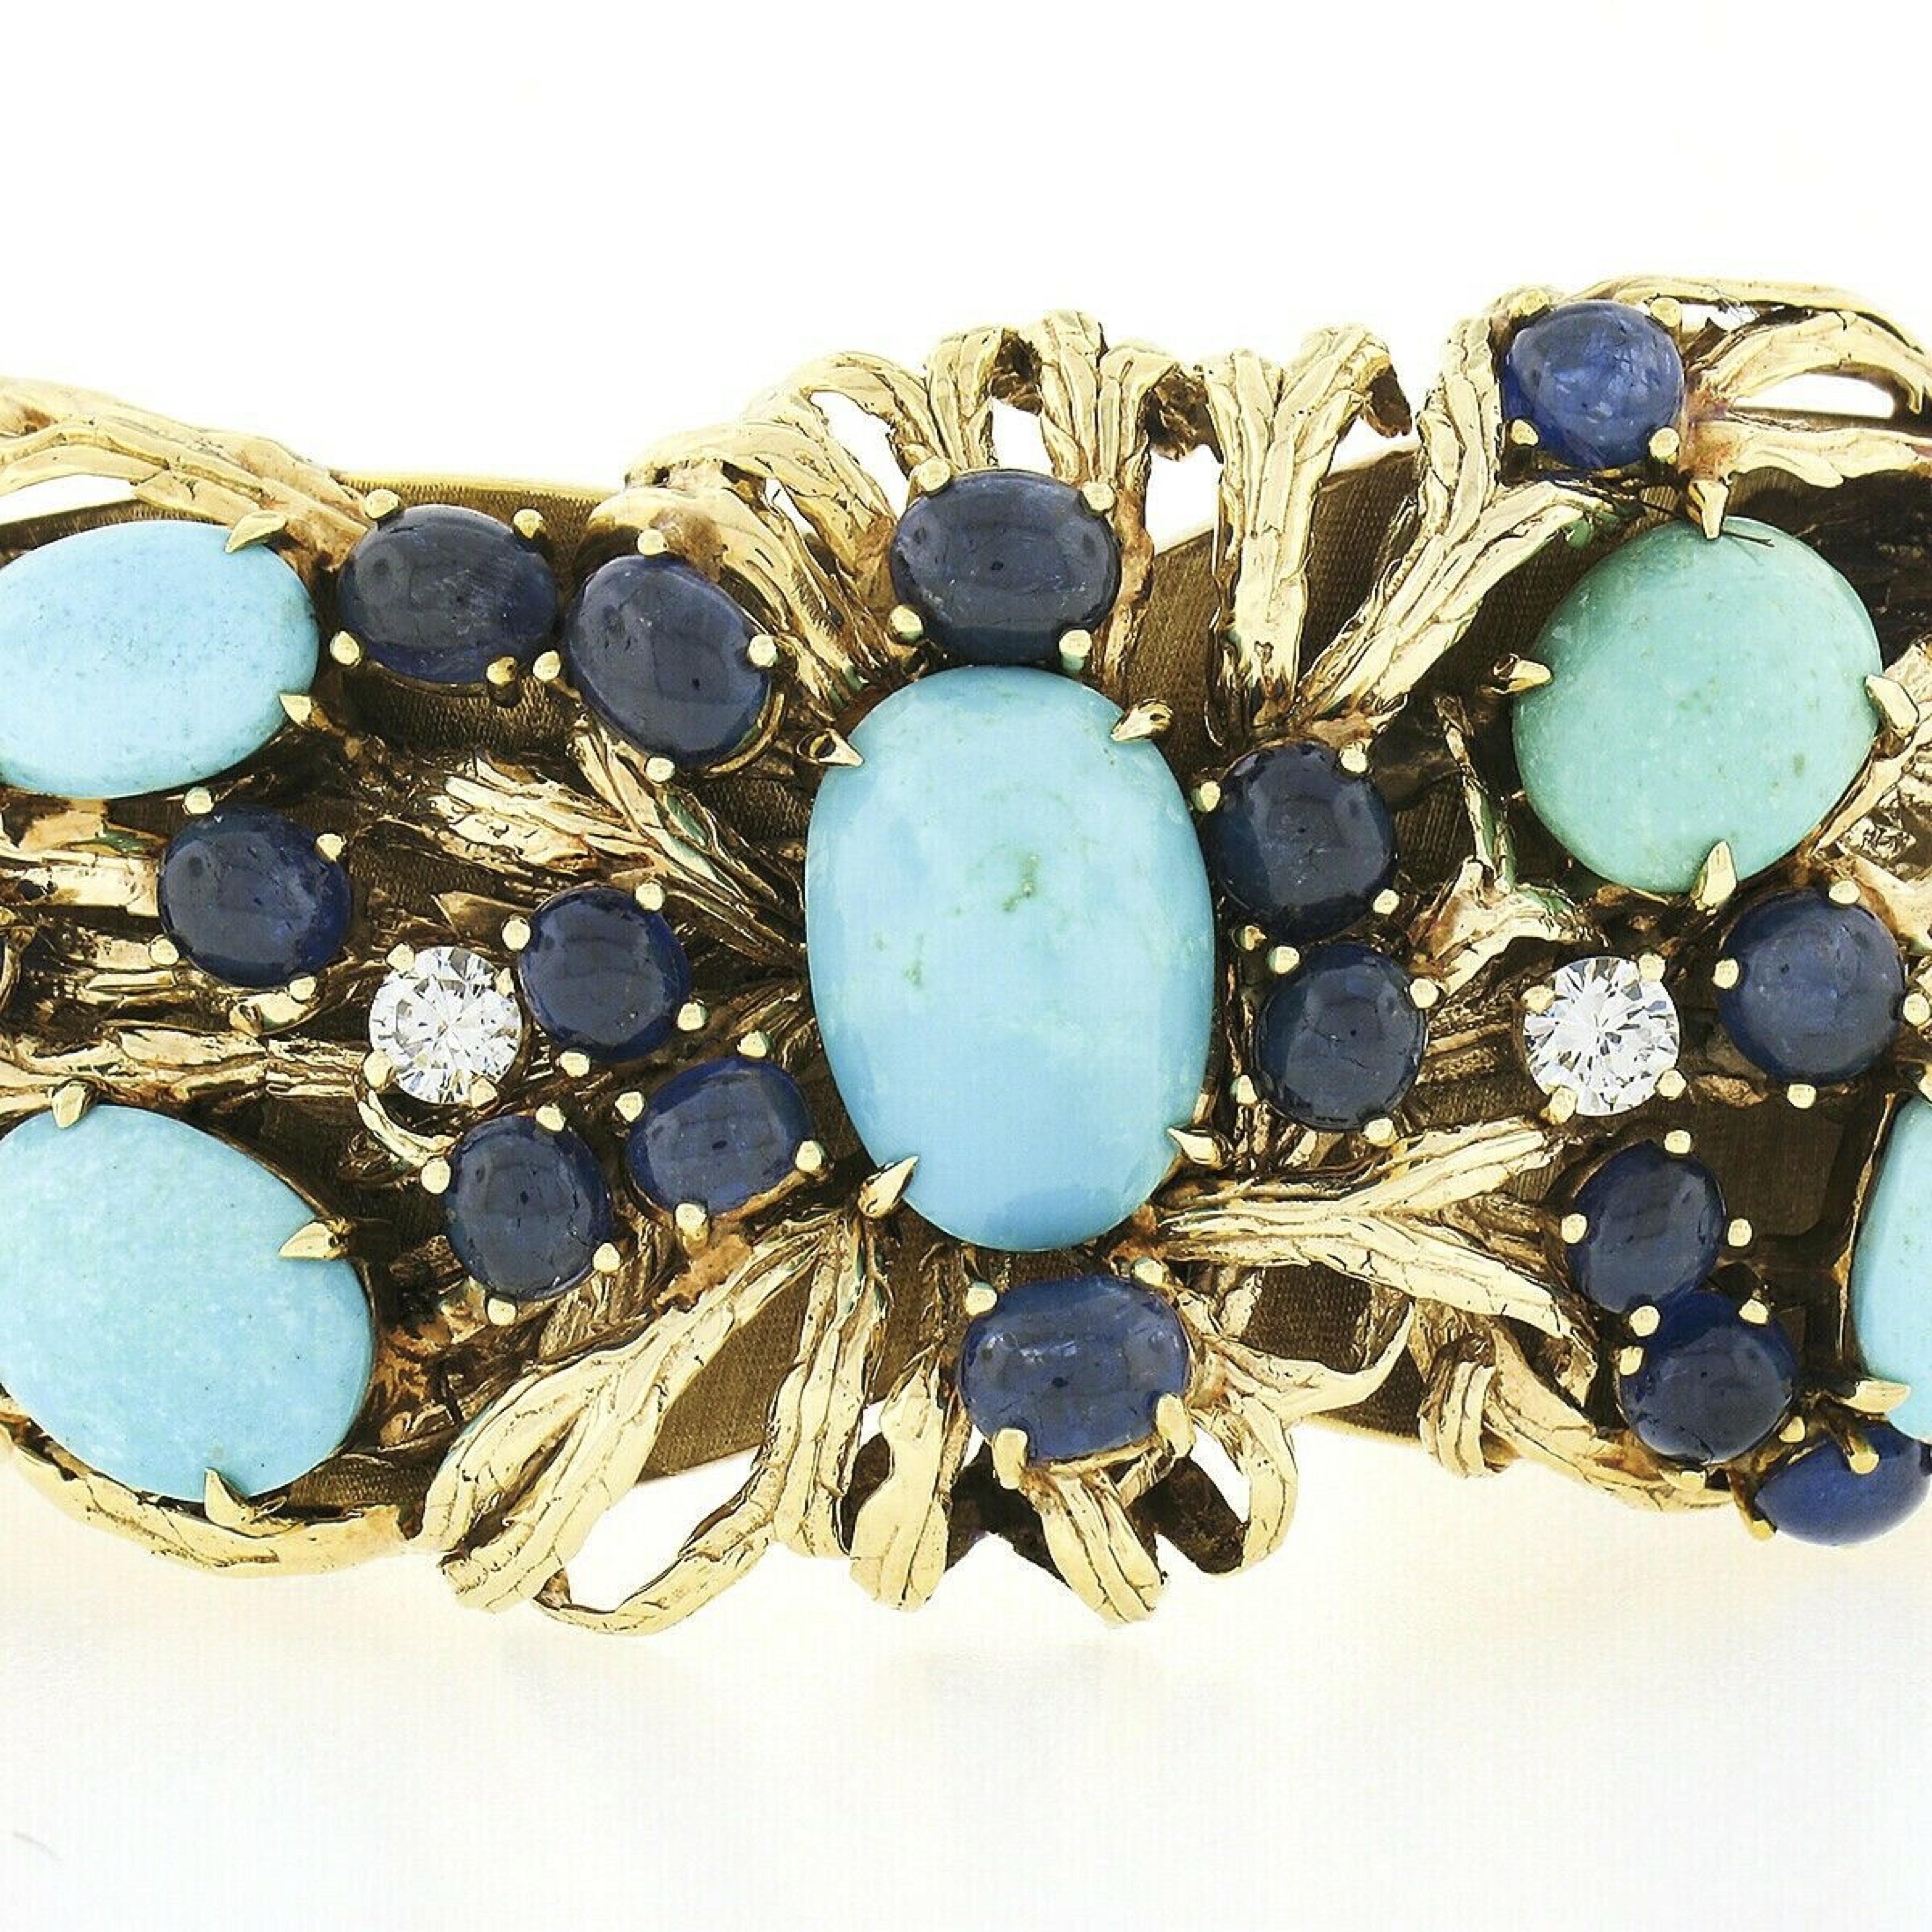 Here we have a very unique, wide, open cuff vintage bracelet crafted in solid 18k yellow gold. It features an incredible 3-dimensional textured leaf design that elegantly branches across its top carrying gorgeous turquoise, sapphires, and diamonds